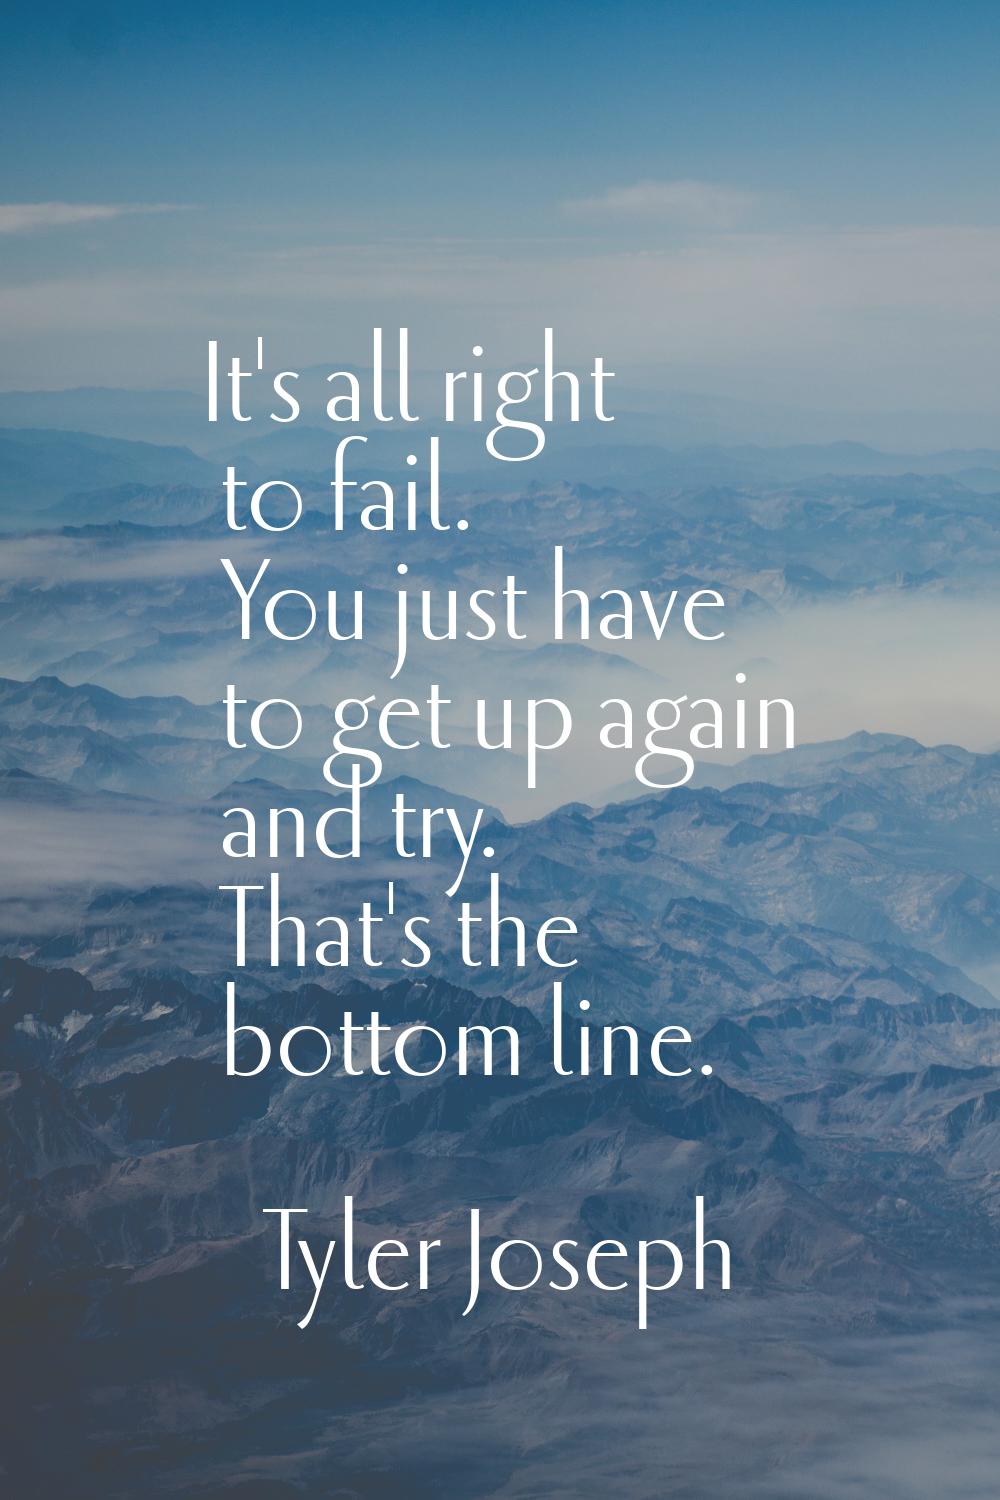 It's all right to fail. You just have to get up again and try. That's the bottom line.